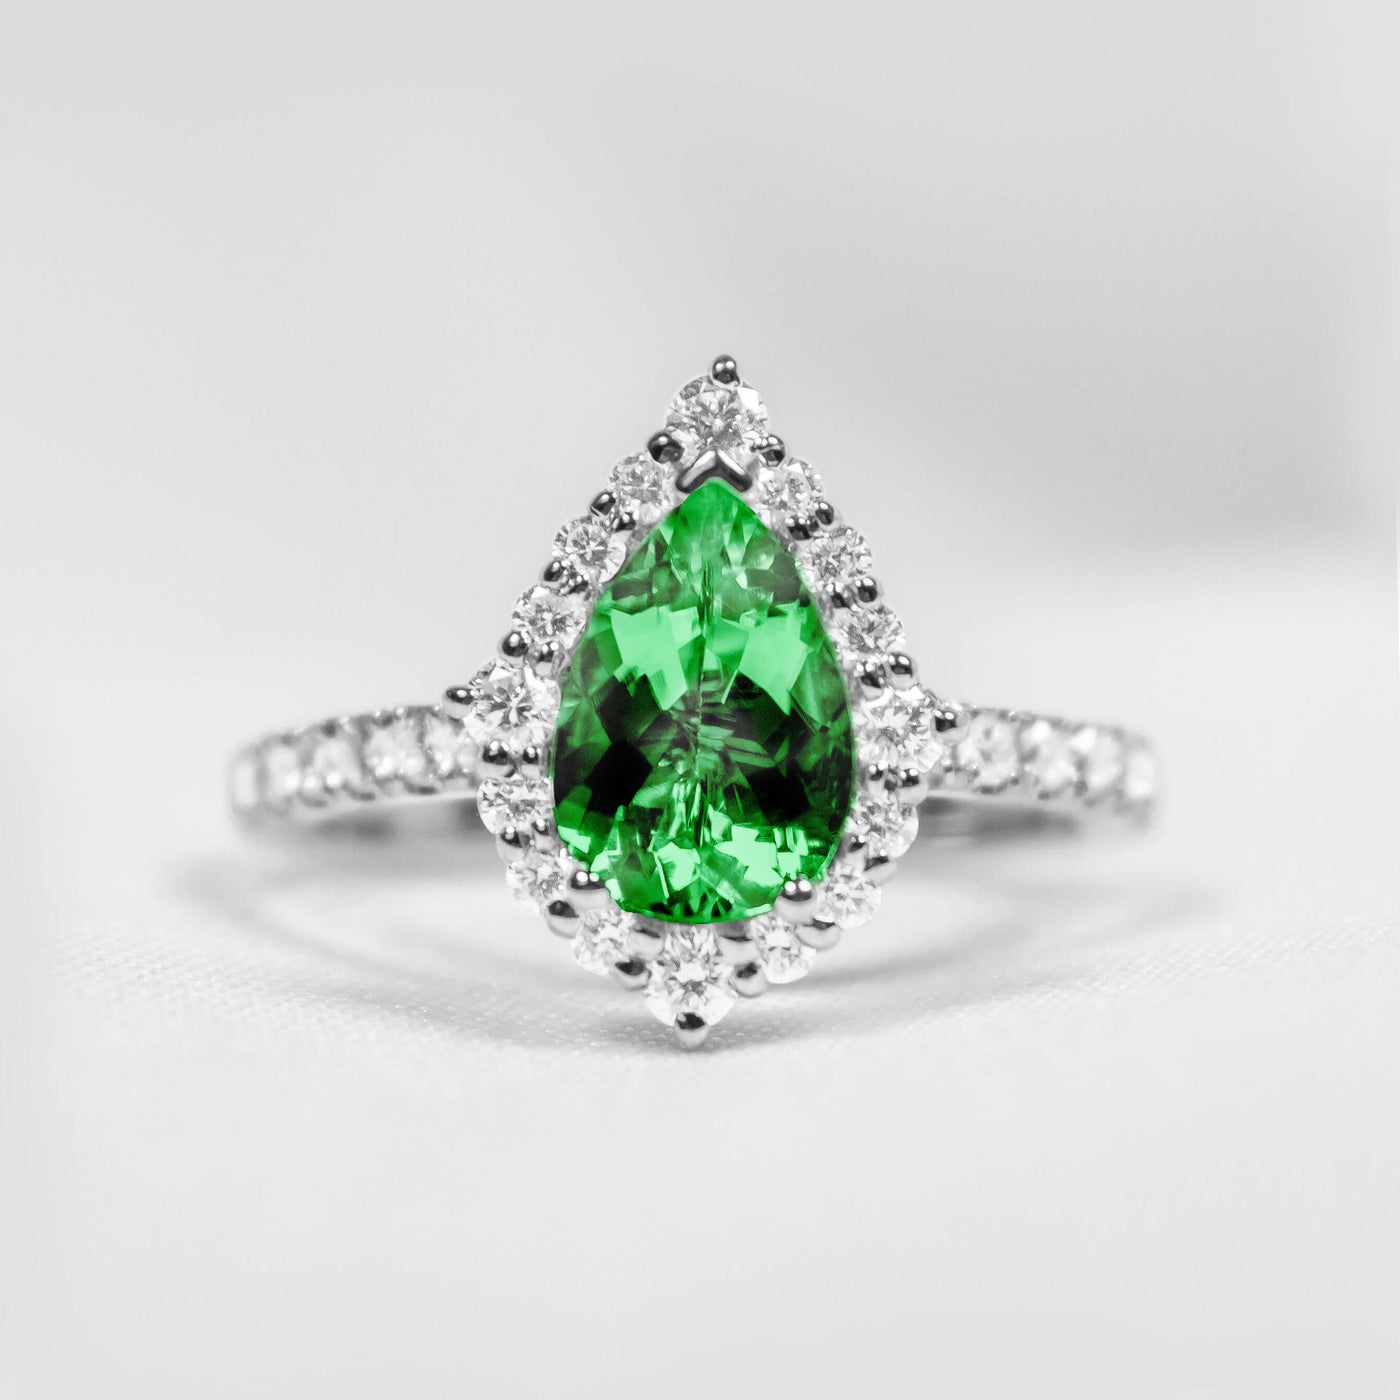 The Sierra Pear Emerald Halo Engagement Ring